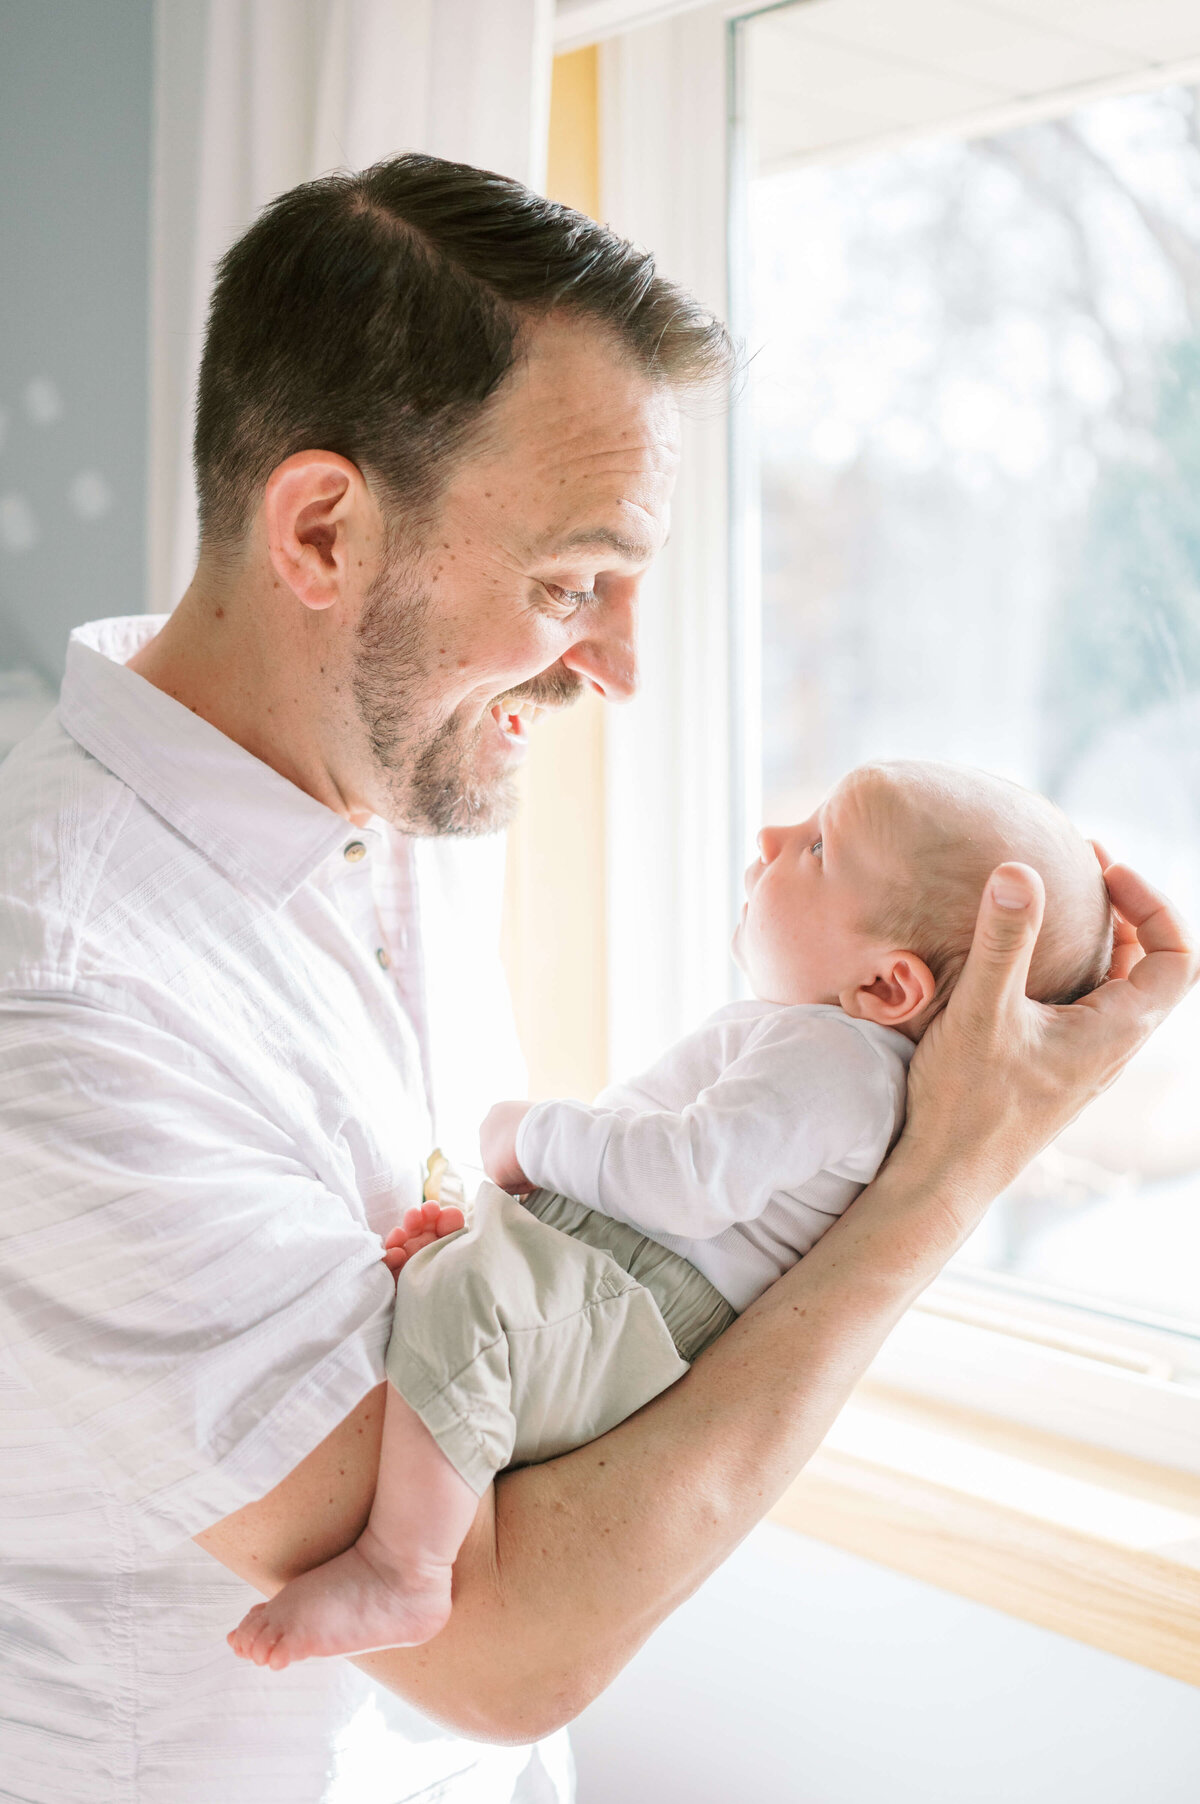 An enthusiastic dad holds his new son in his arms while standing in front of a bright window